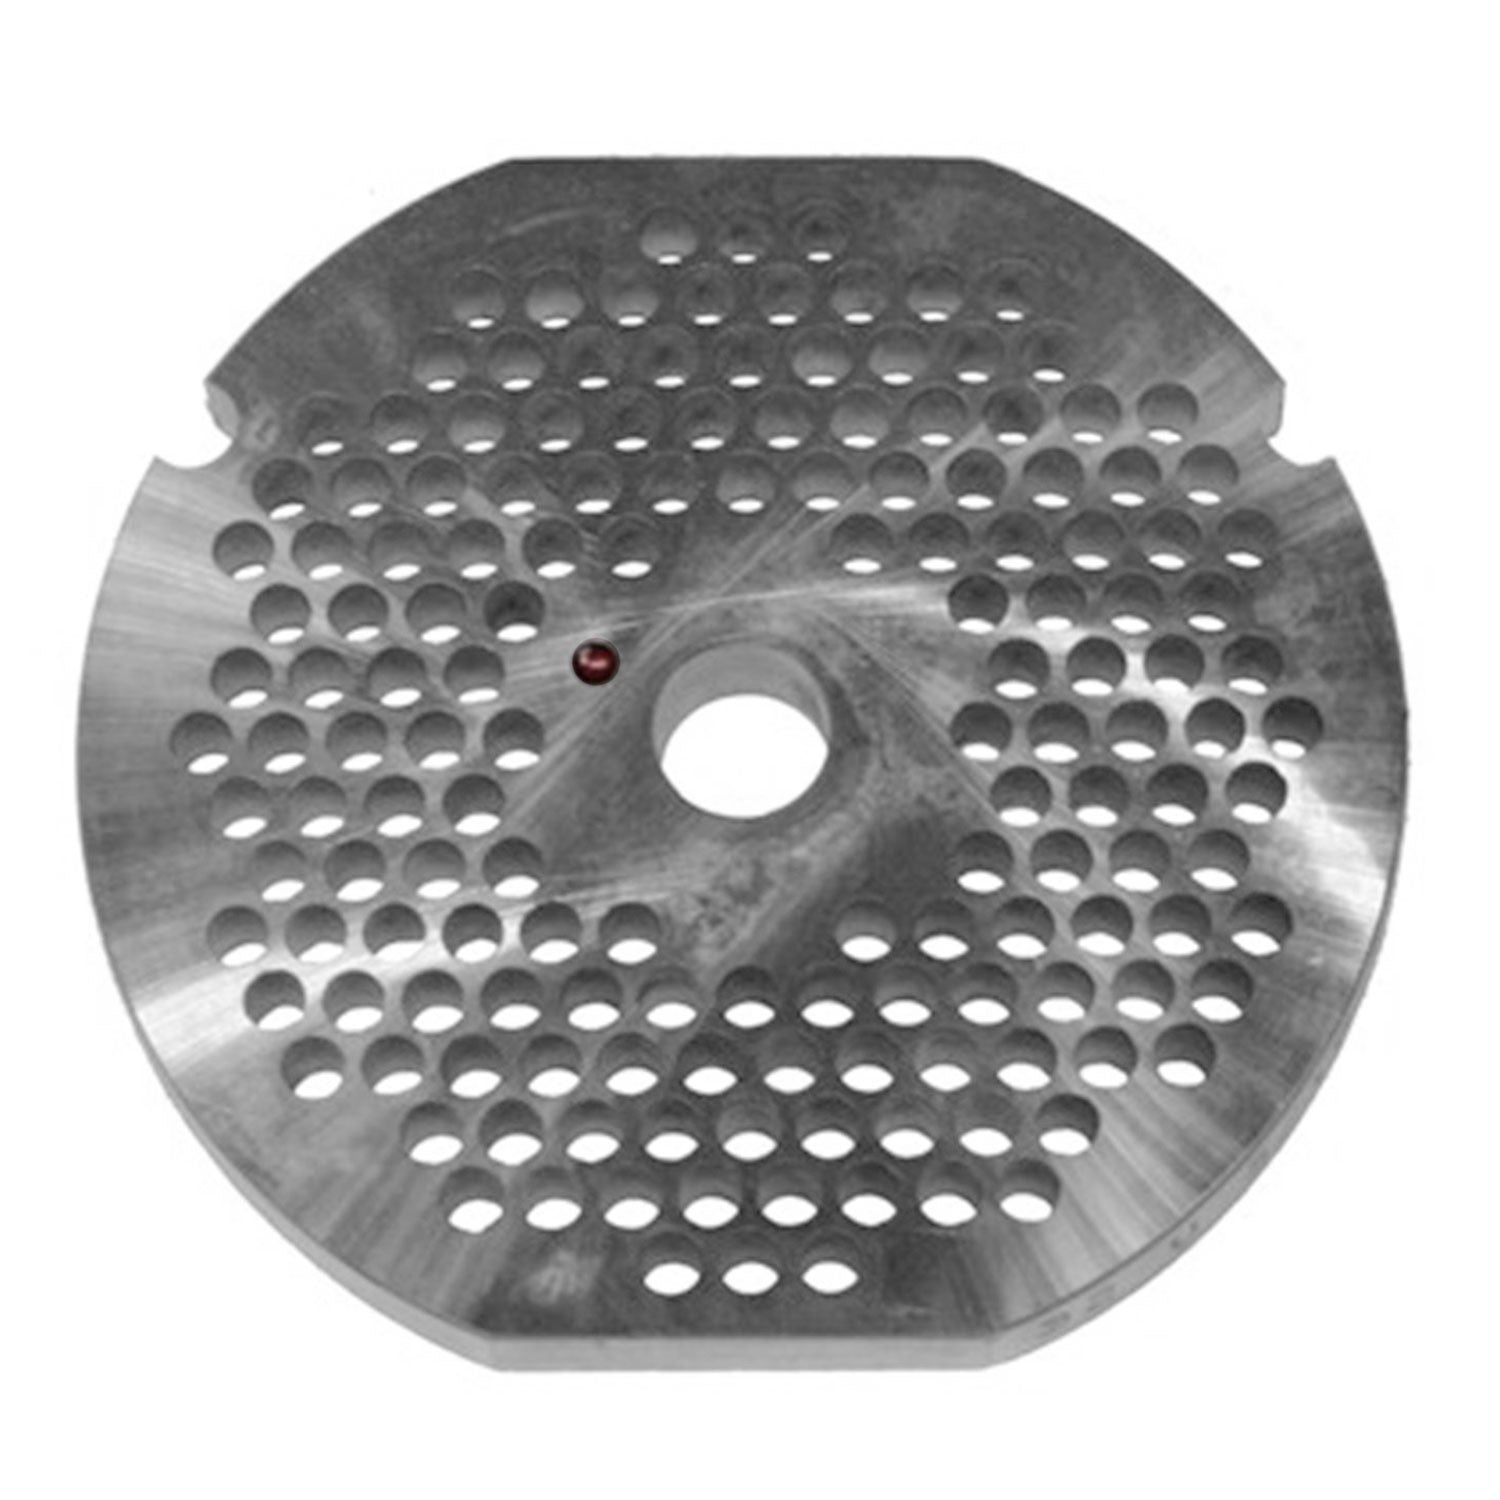 Size 32 Universal Reversible Meat Grinder Plate, 3/16